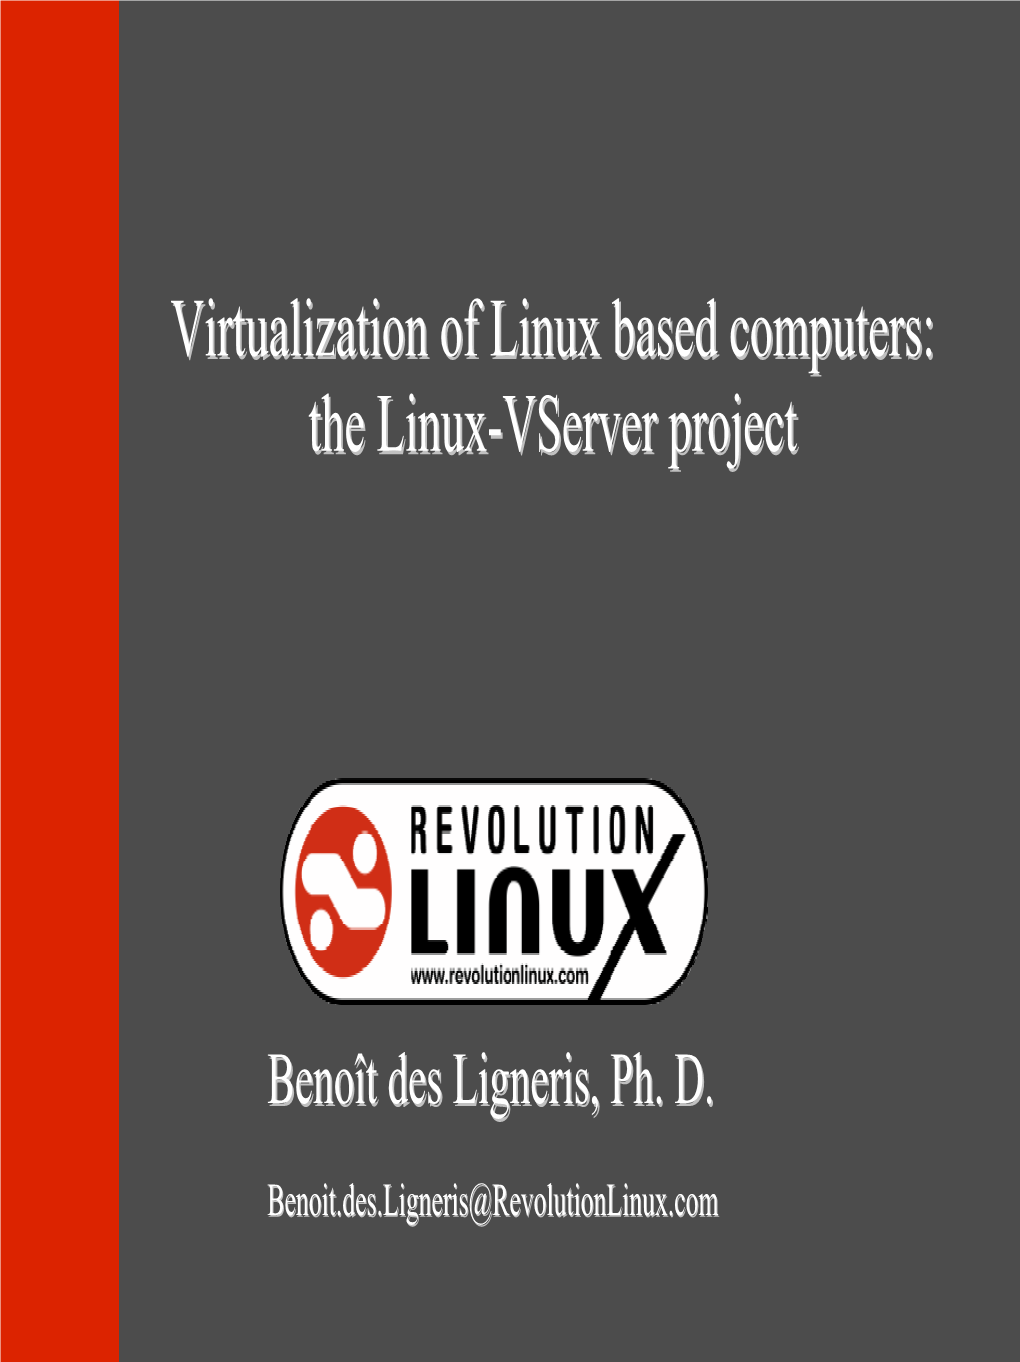 Virtualization of Linux Based Computers: the Linux-Vserver Project